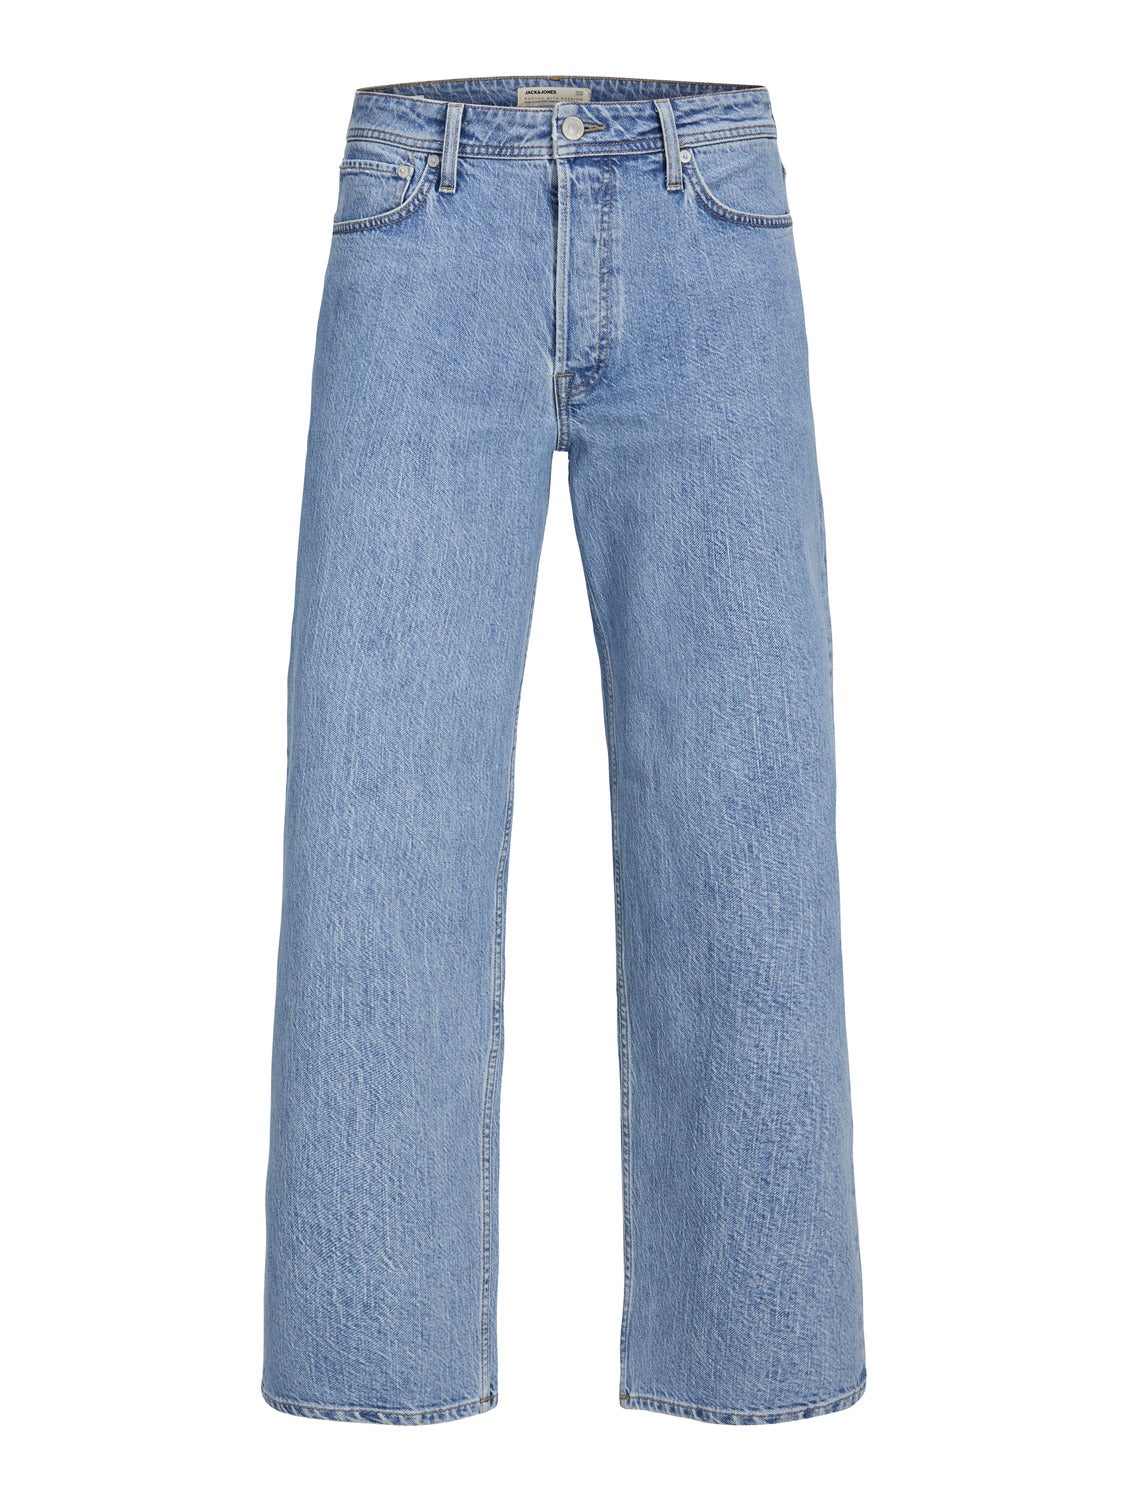 Buy Blue Jeans for Boys by PINK N BLUE Online | Ajio.com